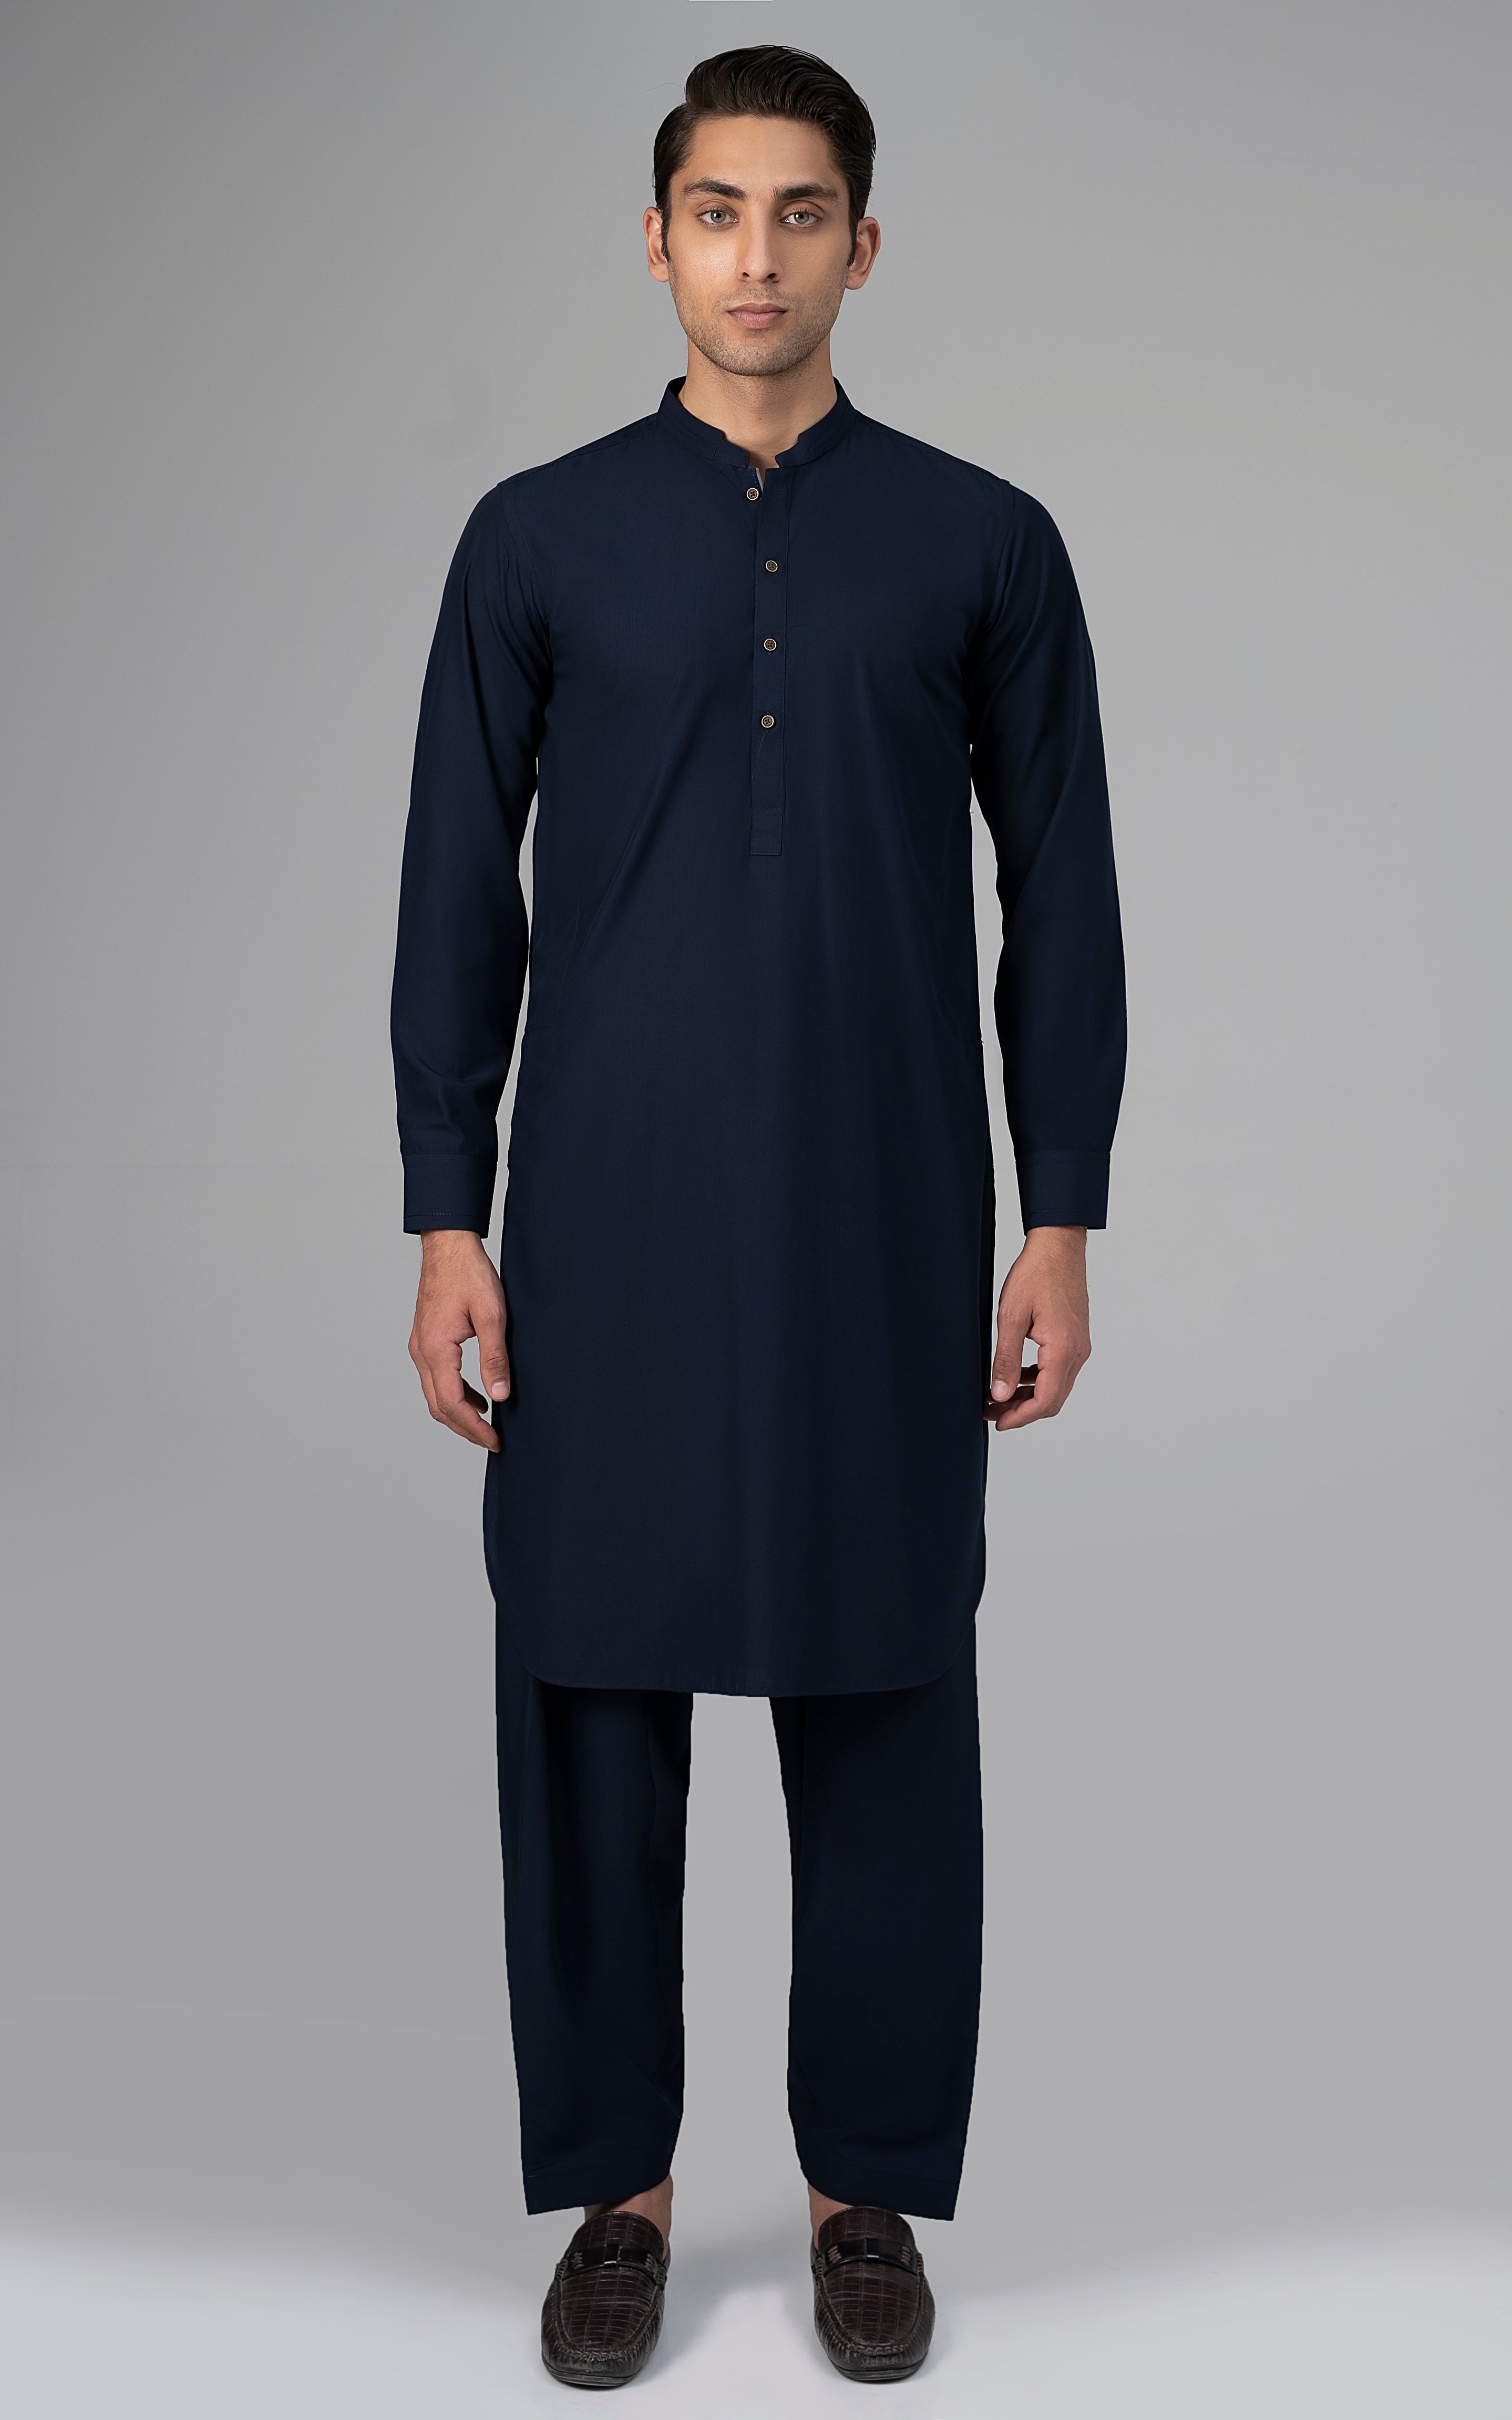 BLENDED WASH & WEAR - SIGNATURE COLLECTION NAVY